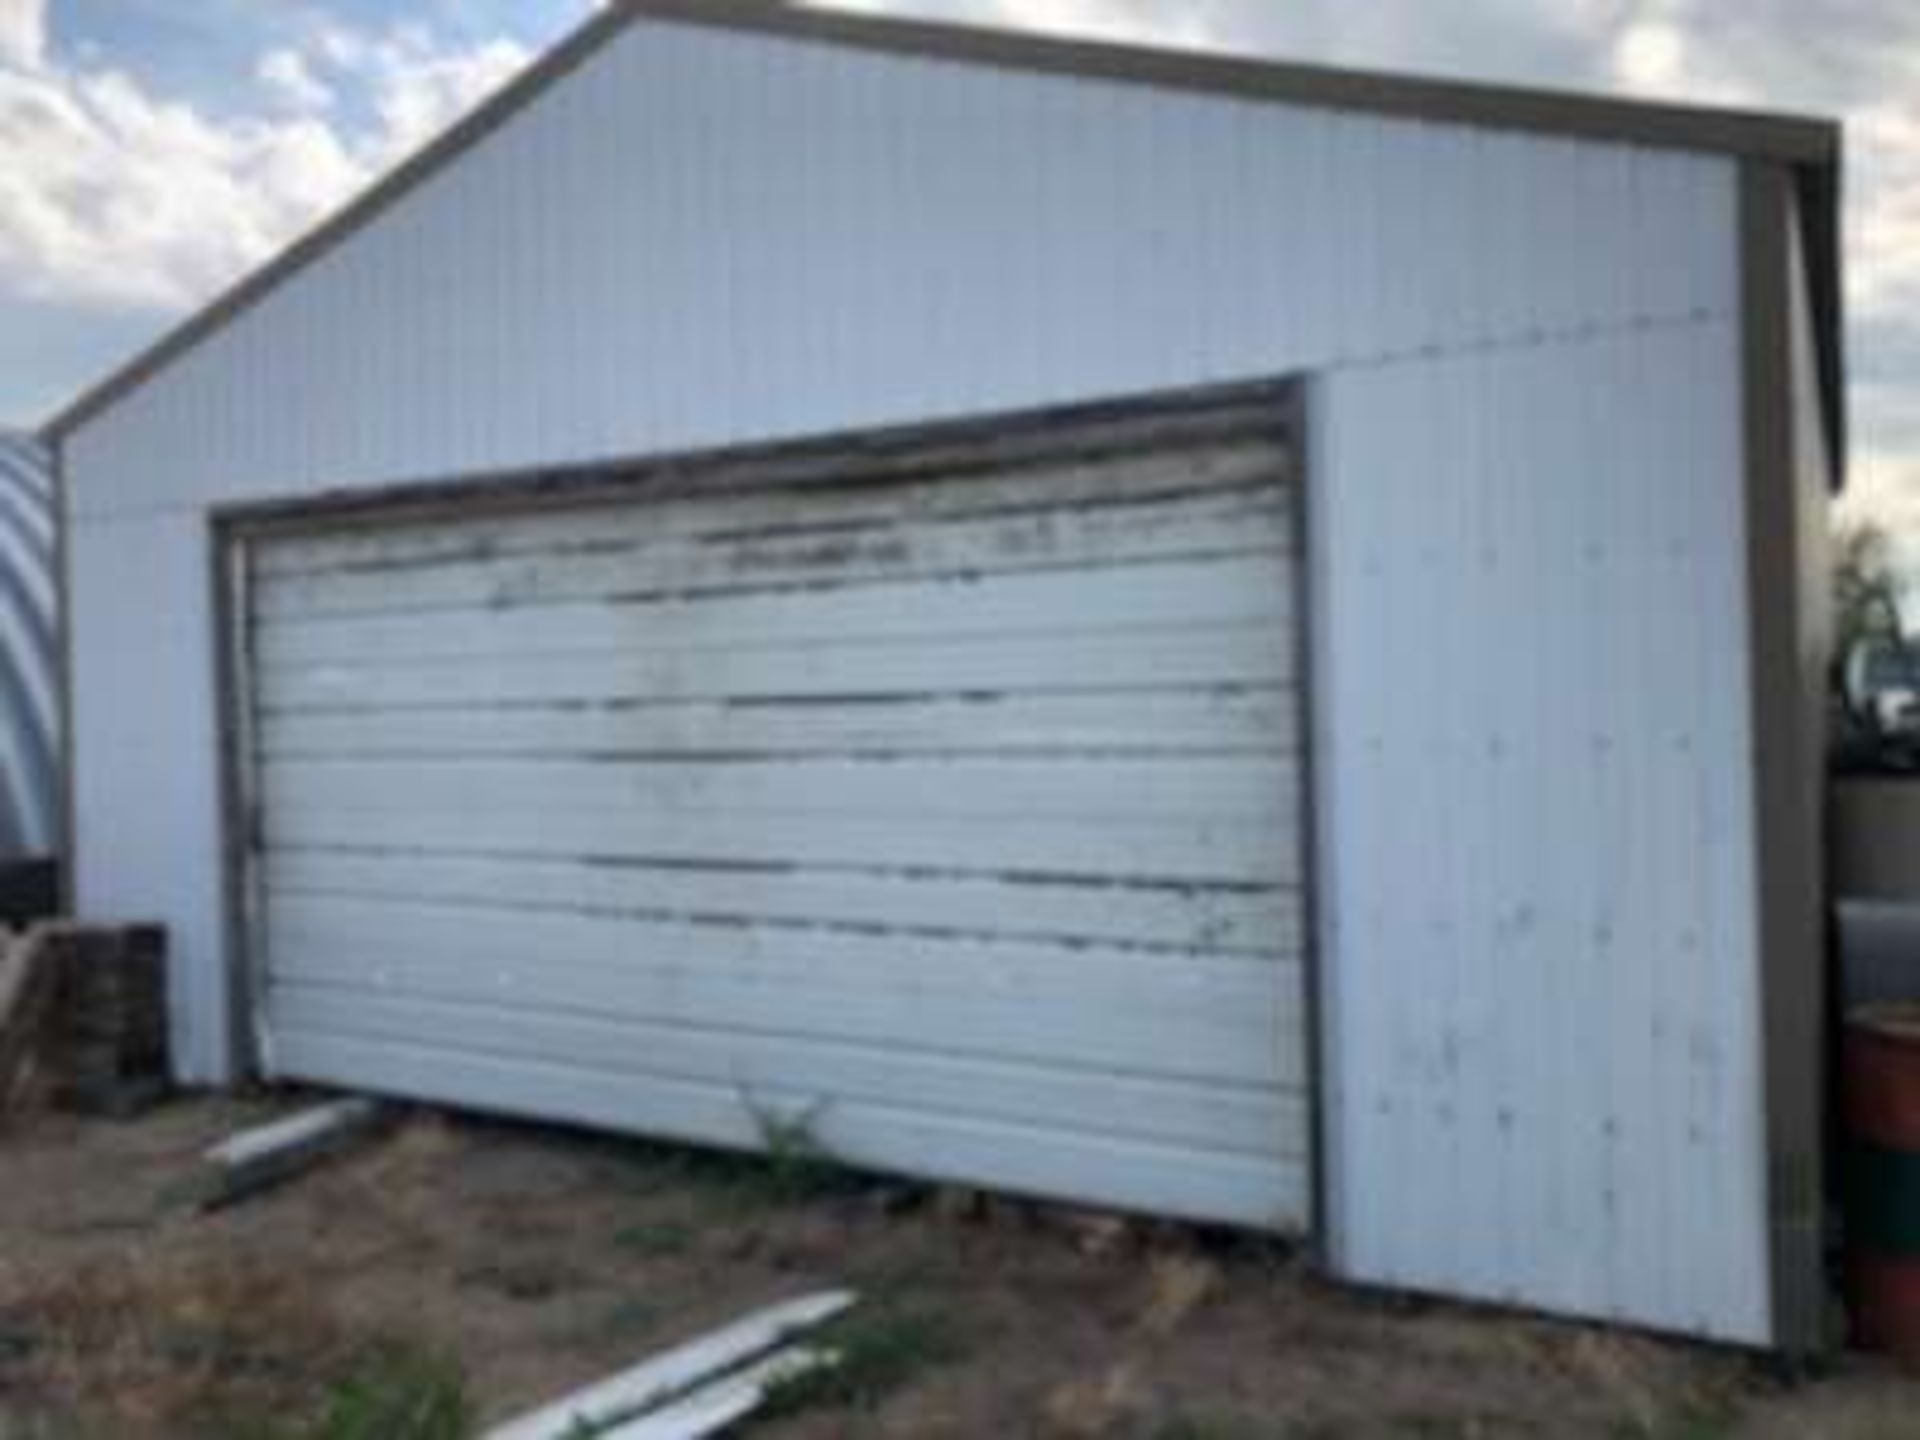 24ft x 24 ft farm shed building , metal roof and walls, 8 ft high x 16 ft wide door, metal